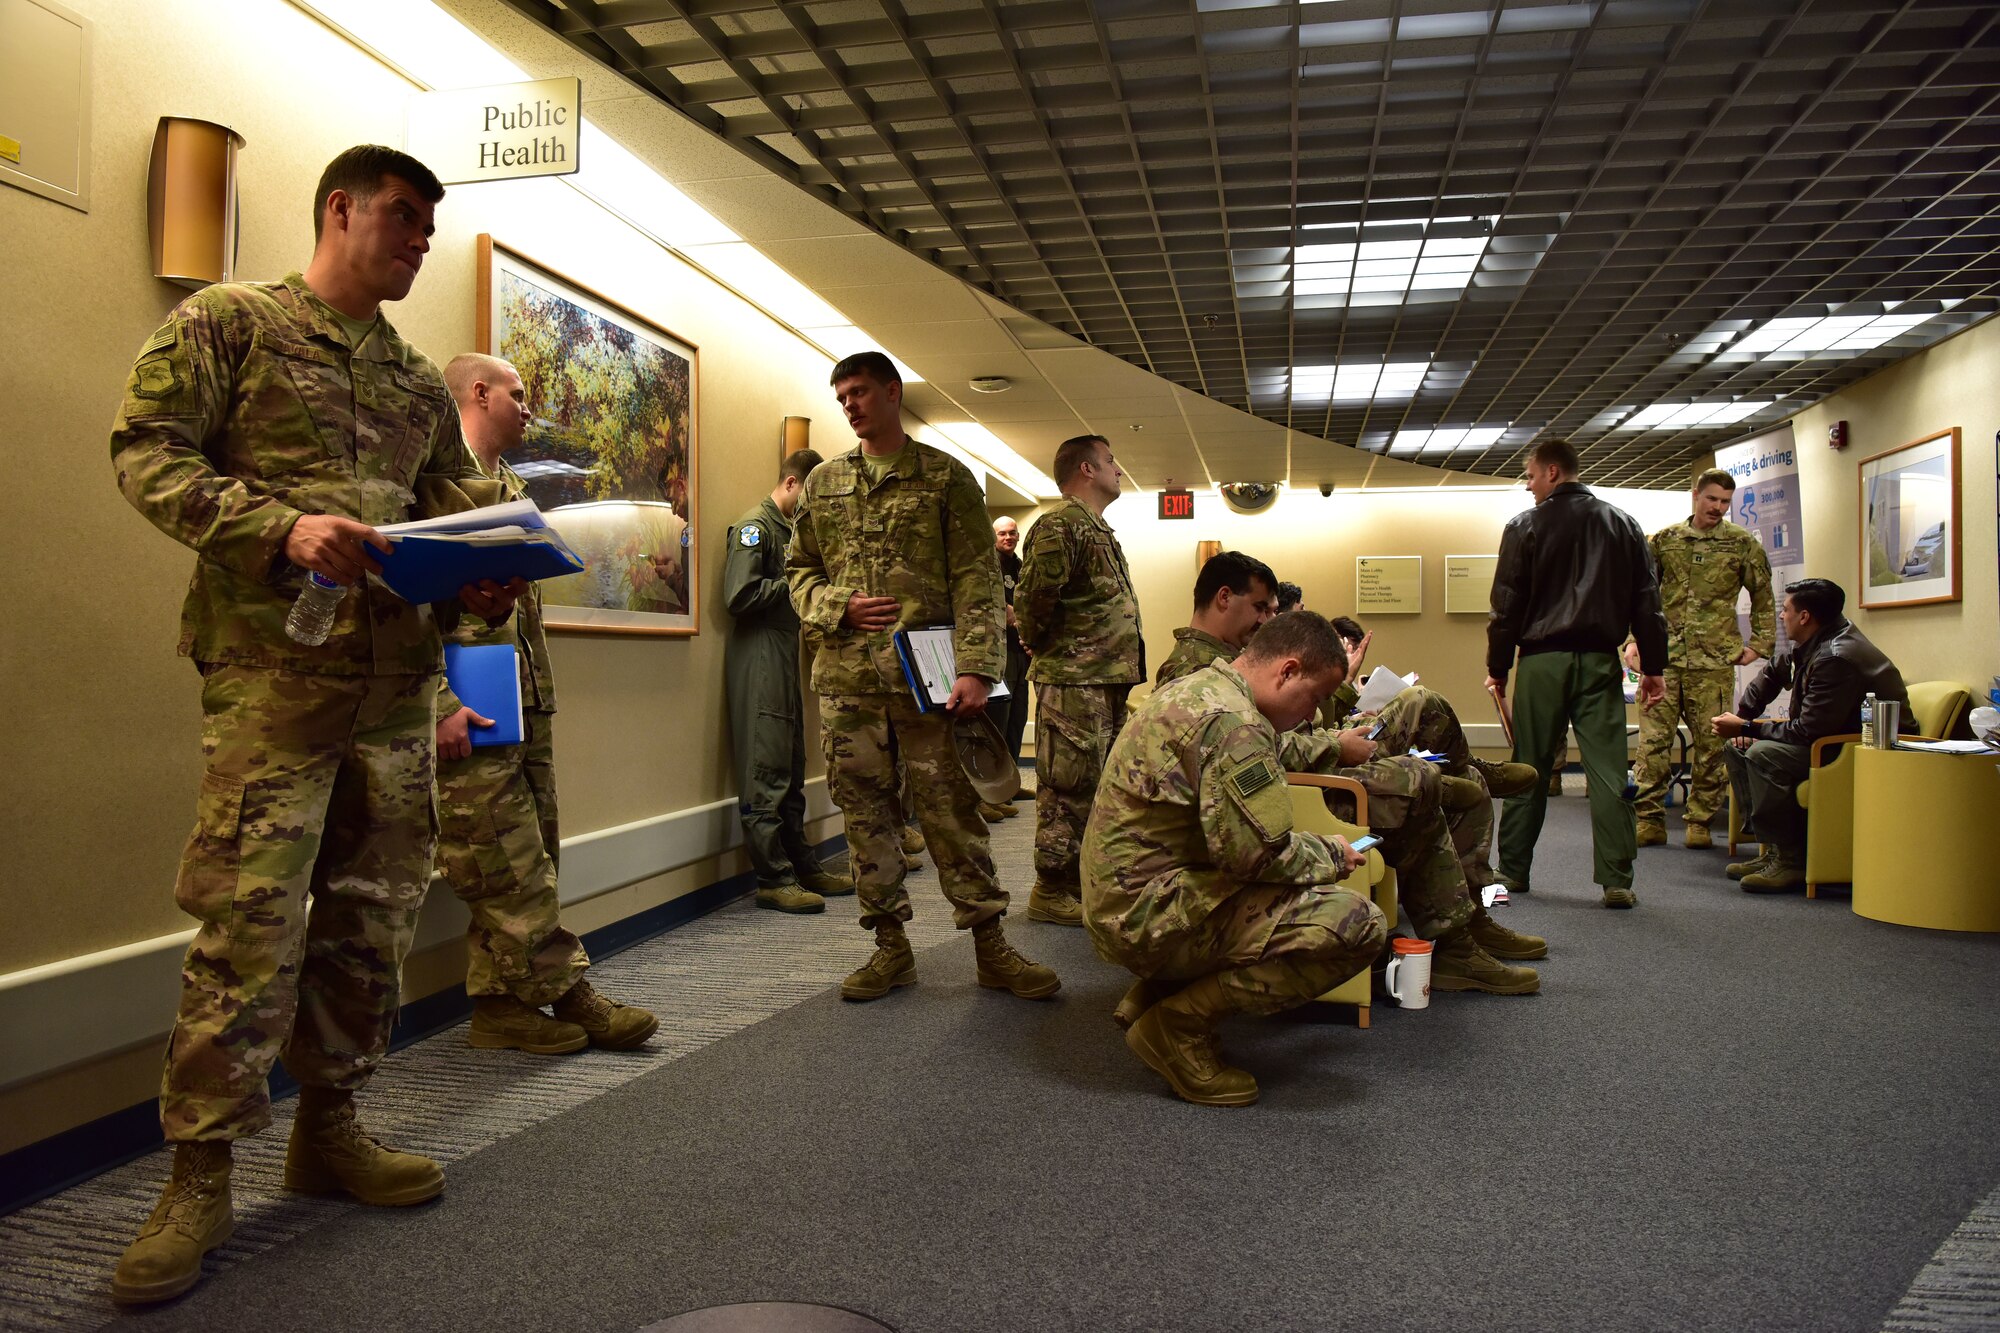 Airmen wait in line at the base clinic.